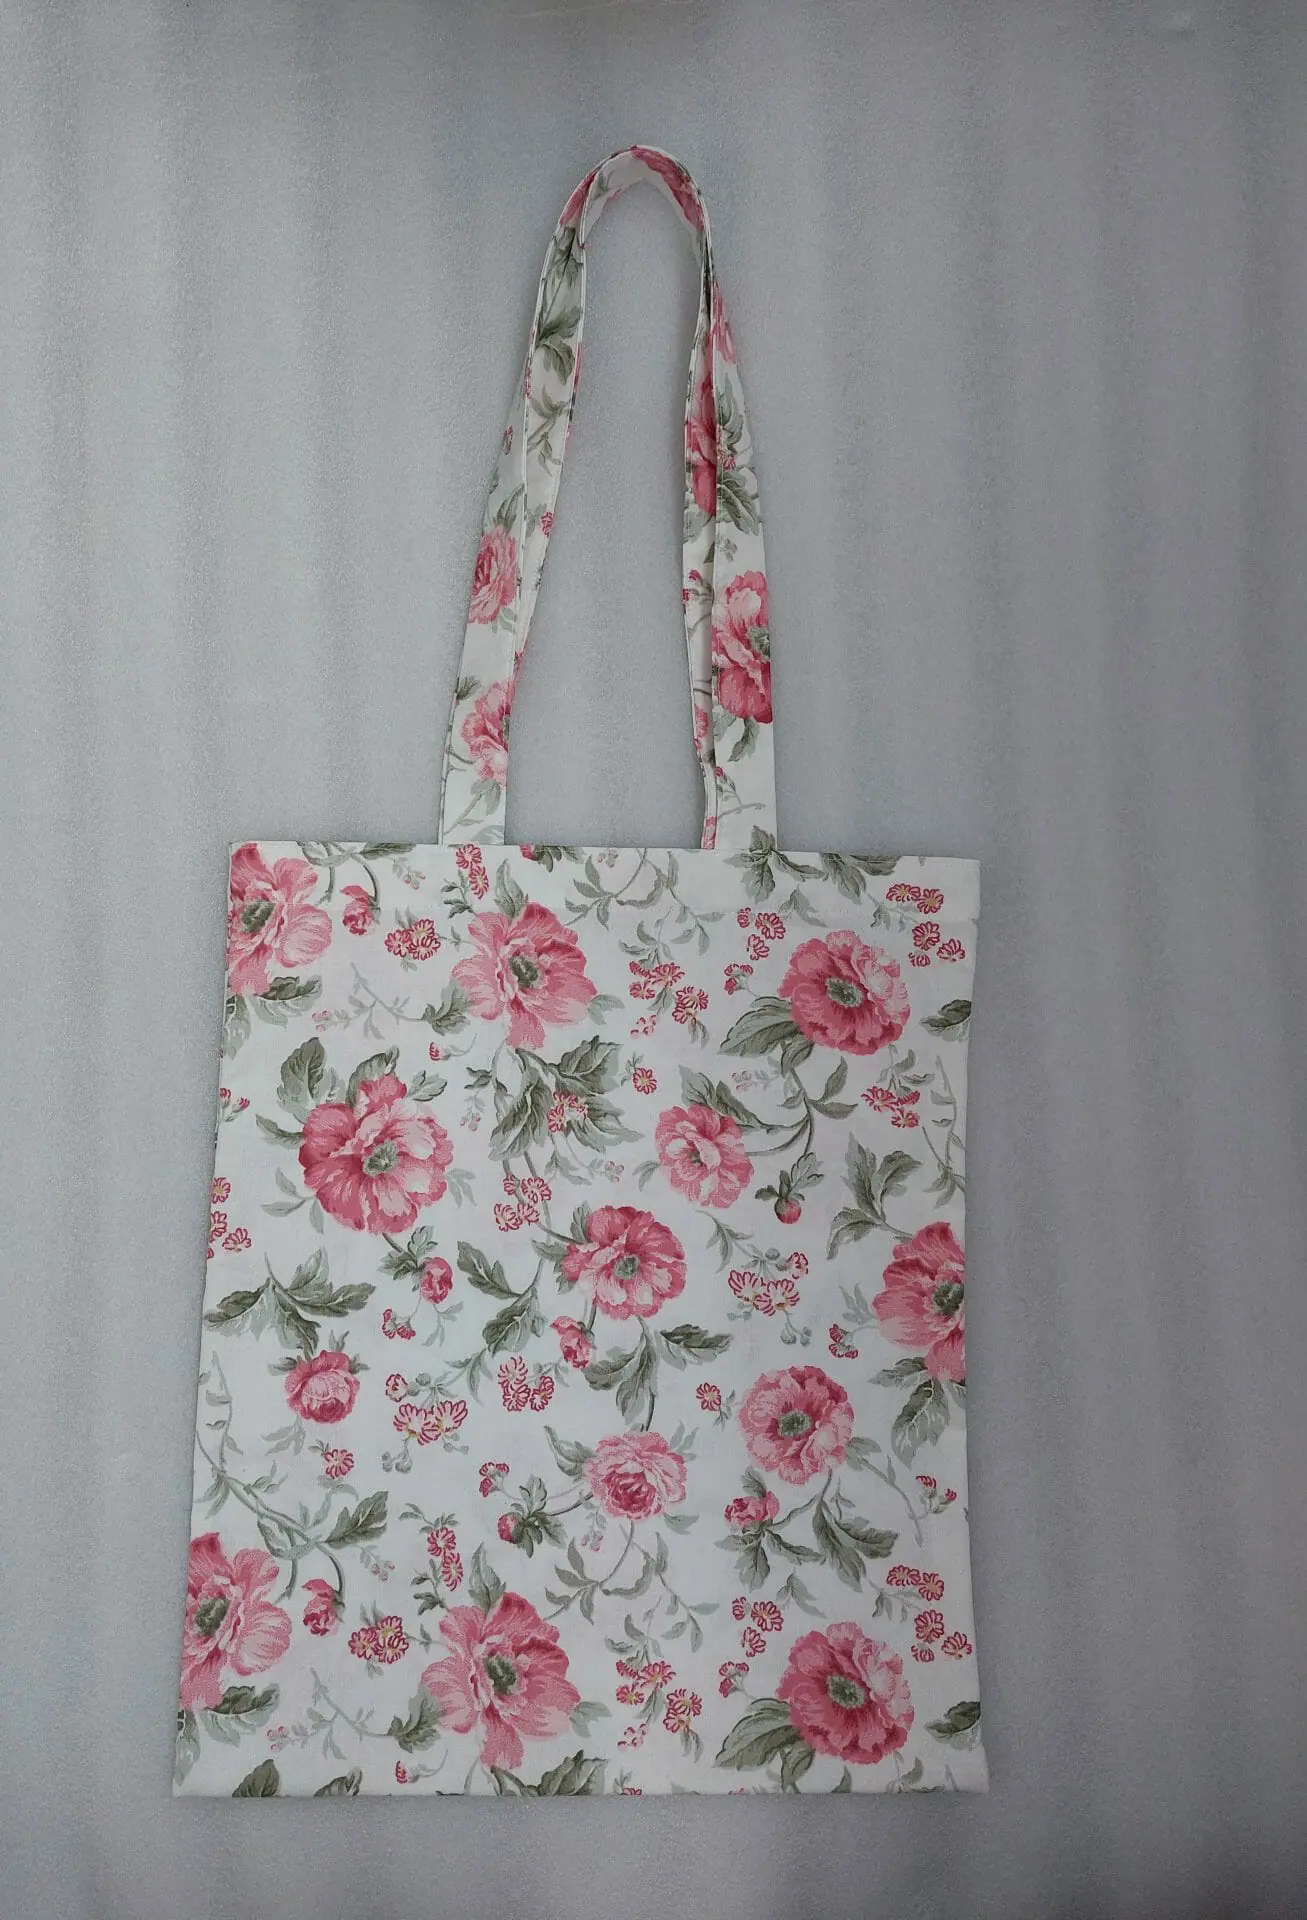 Strong reusable lilac eco-friendly canvas tote bag with flowers